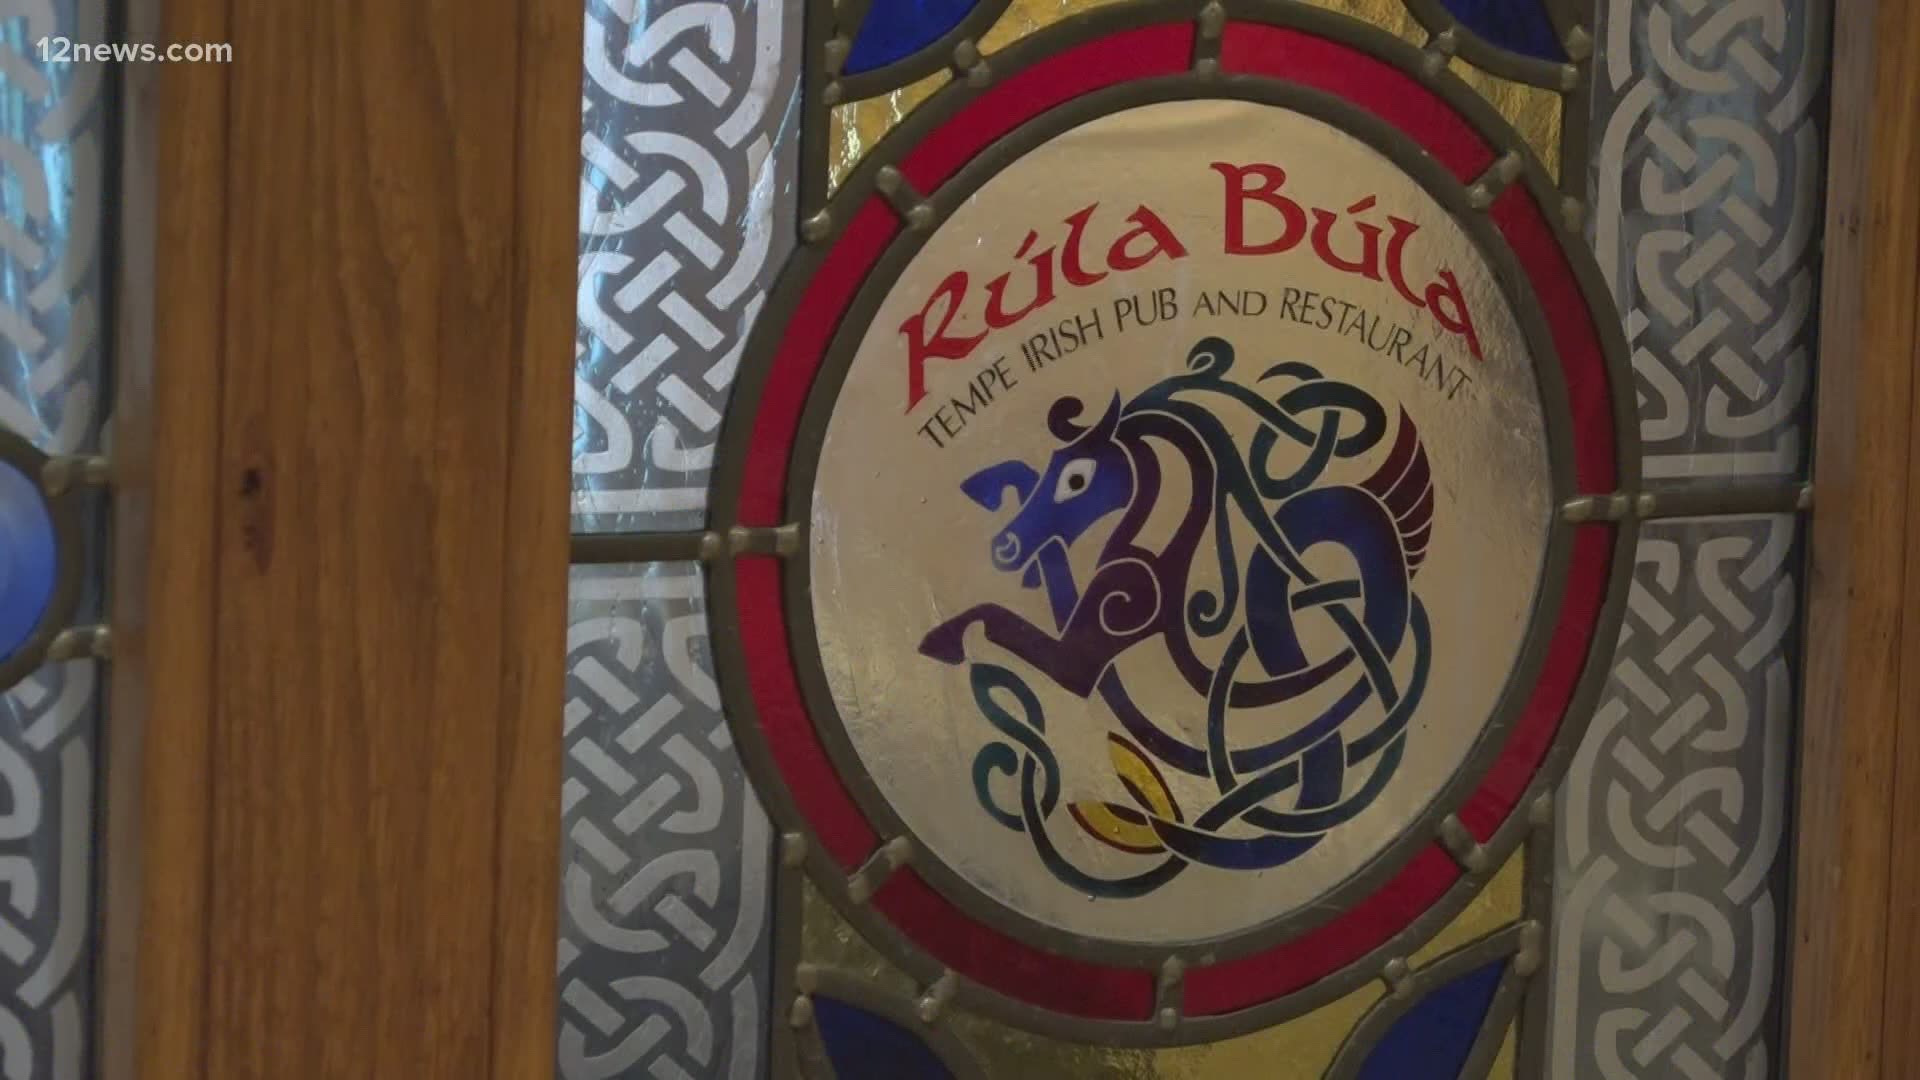 After 20 years on Mill Avenue, Rula Bula Irish Pub is closing its doors due to a rent dispute with their out-of-state landlord company.